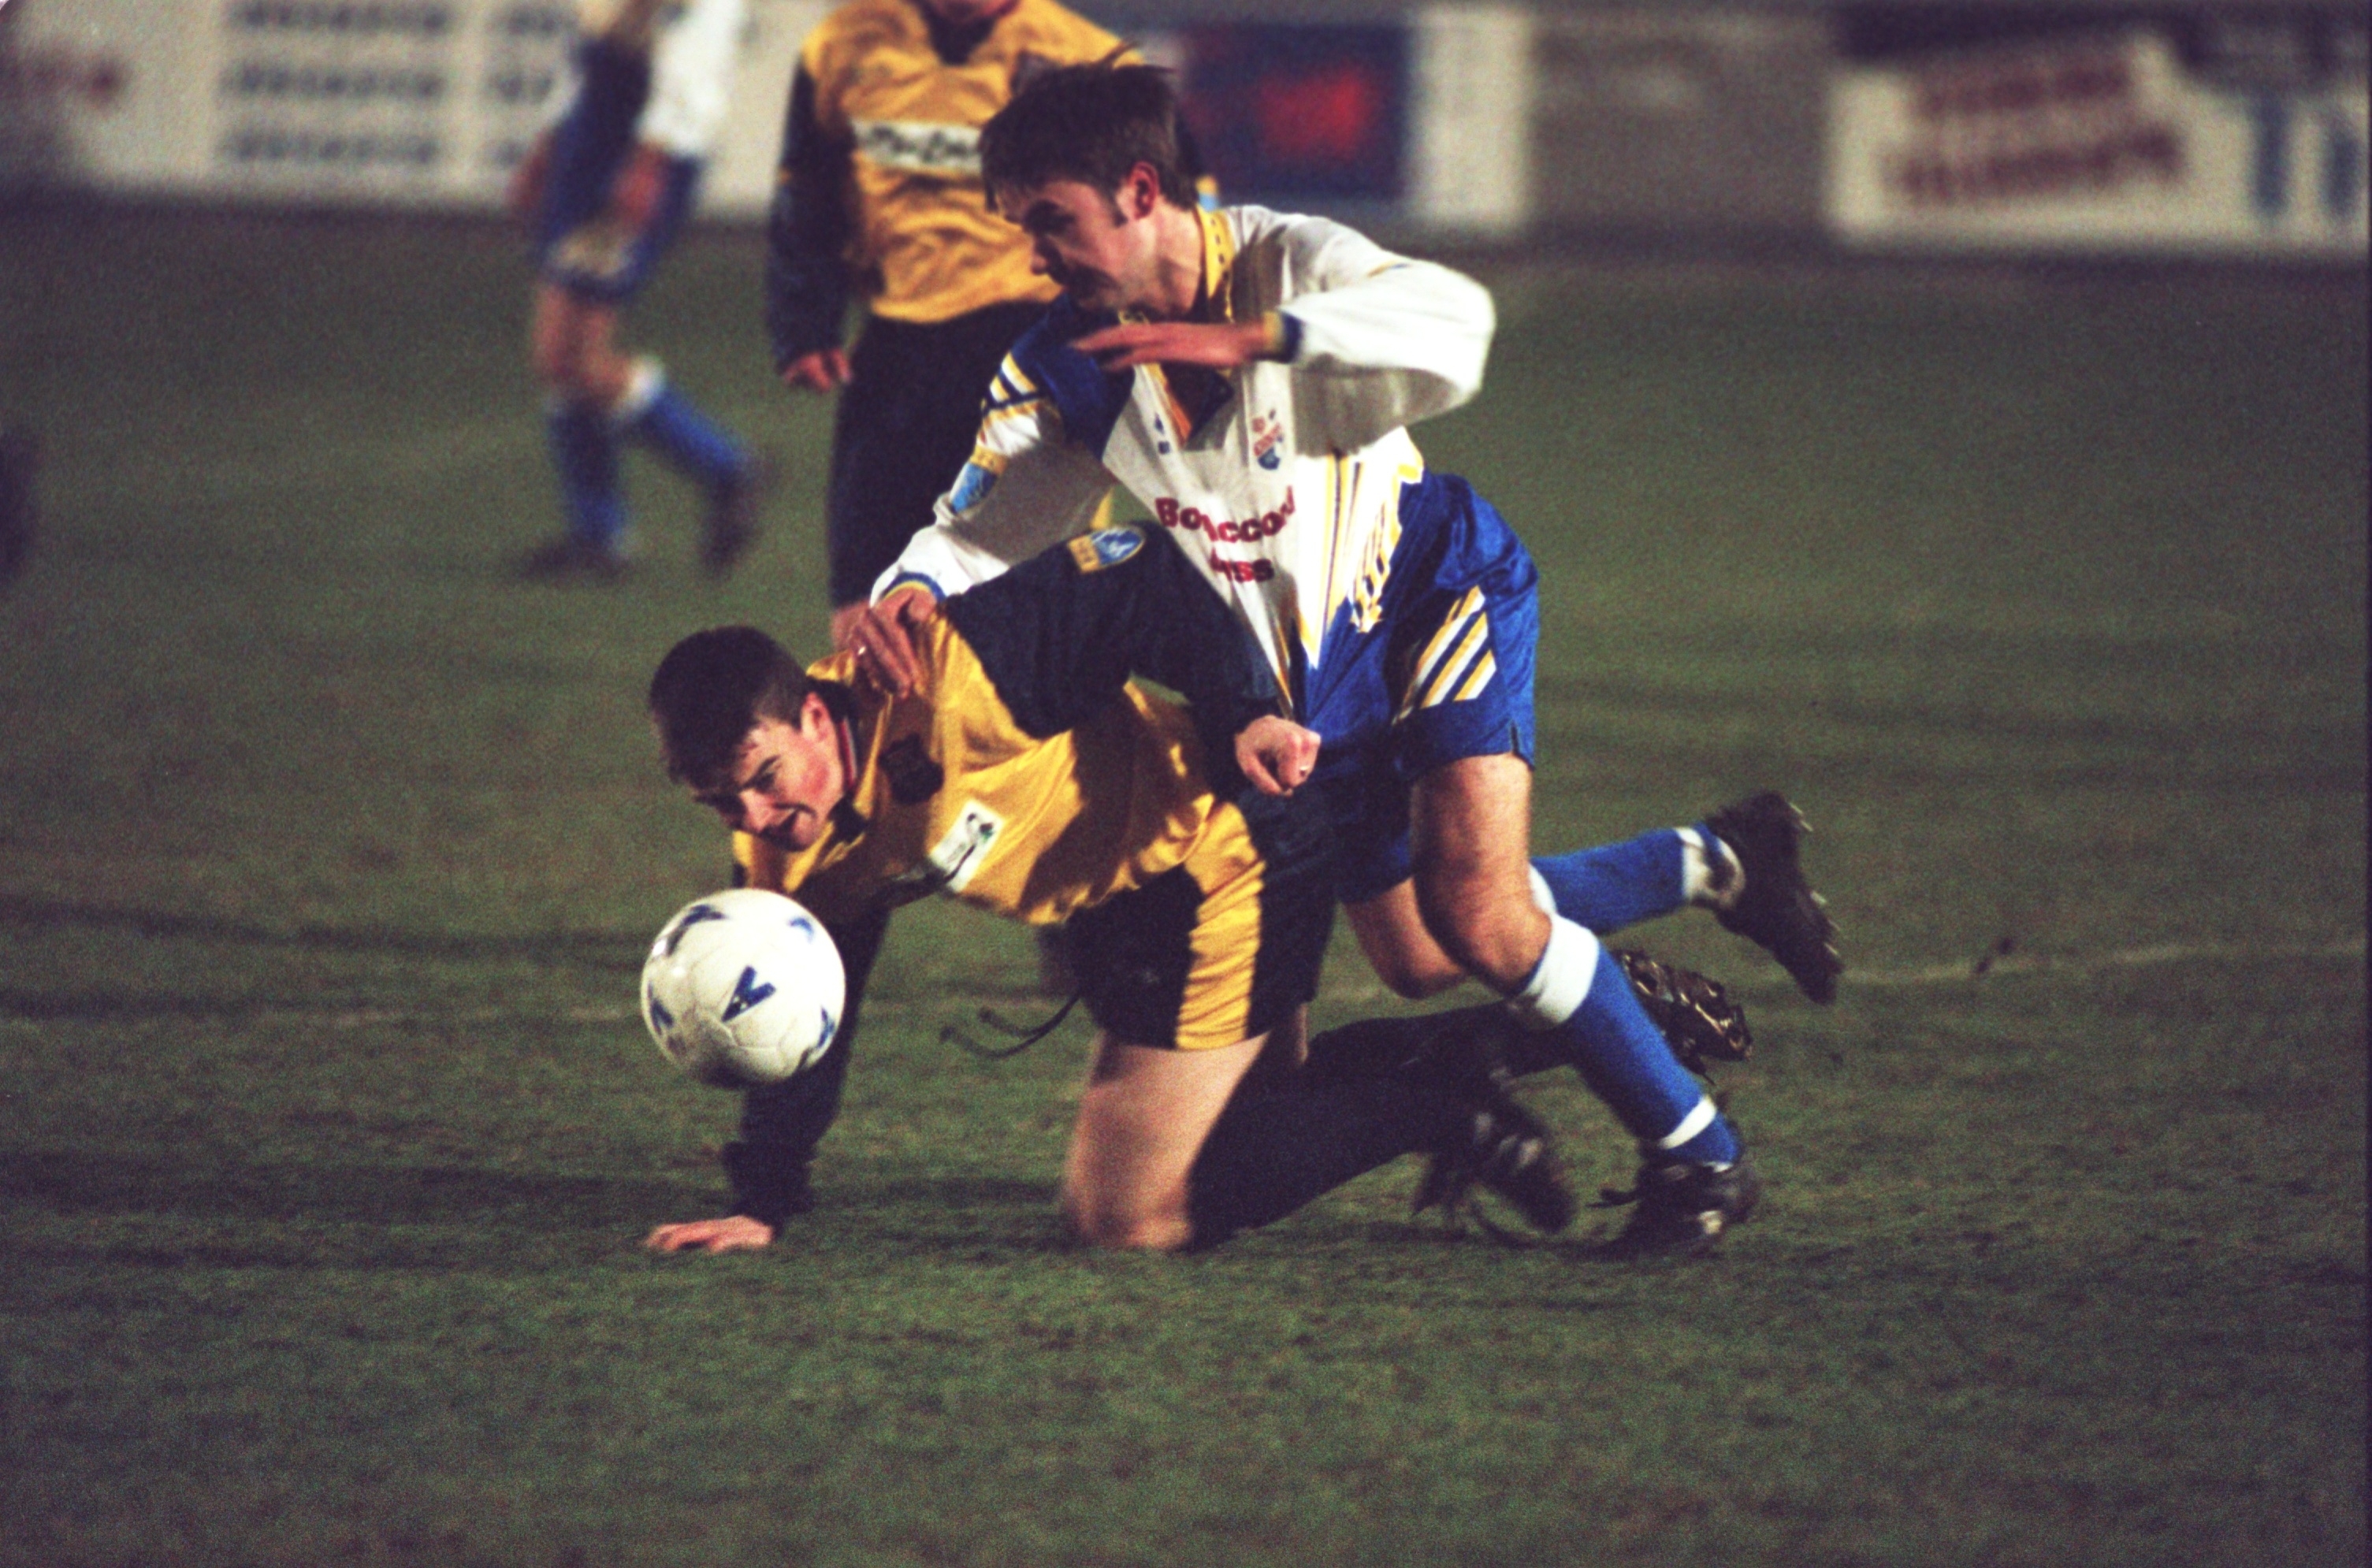 Broddle playing for Ross County against Montrose in 1997